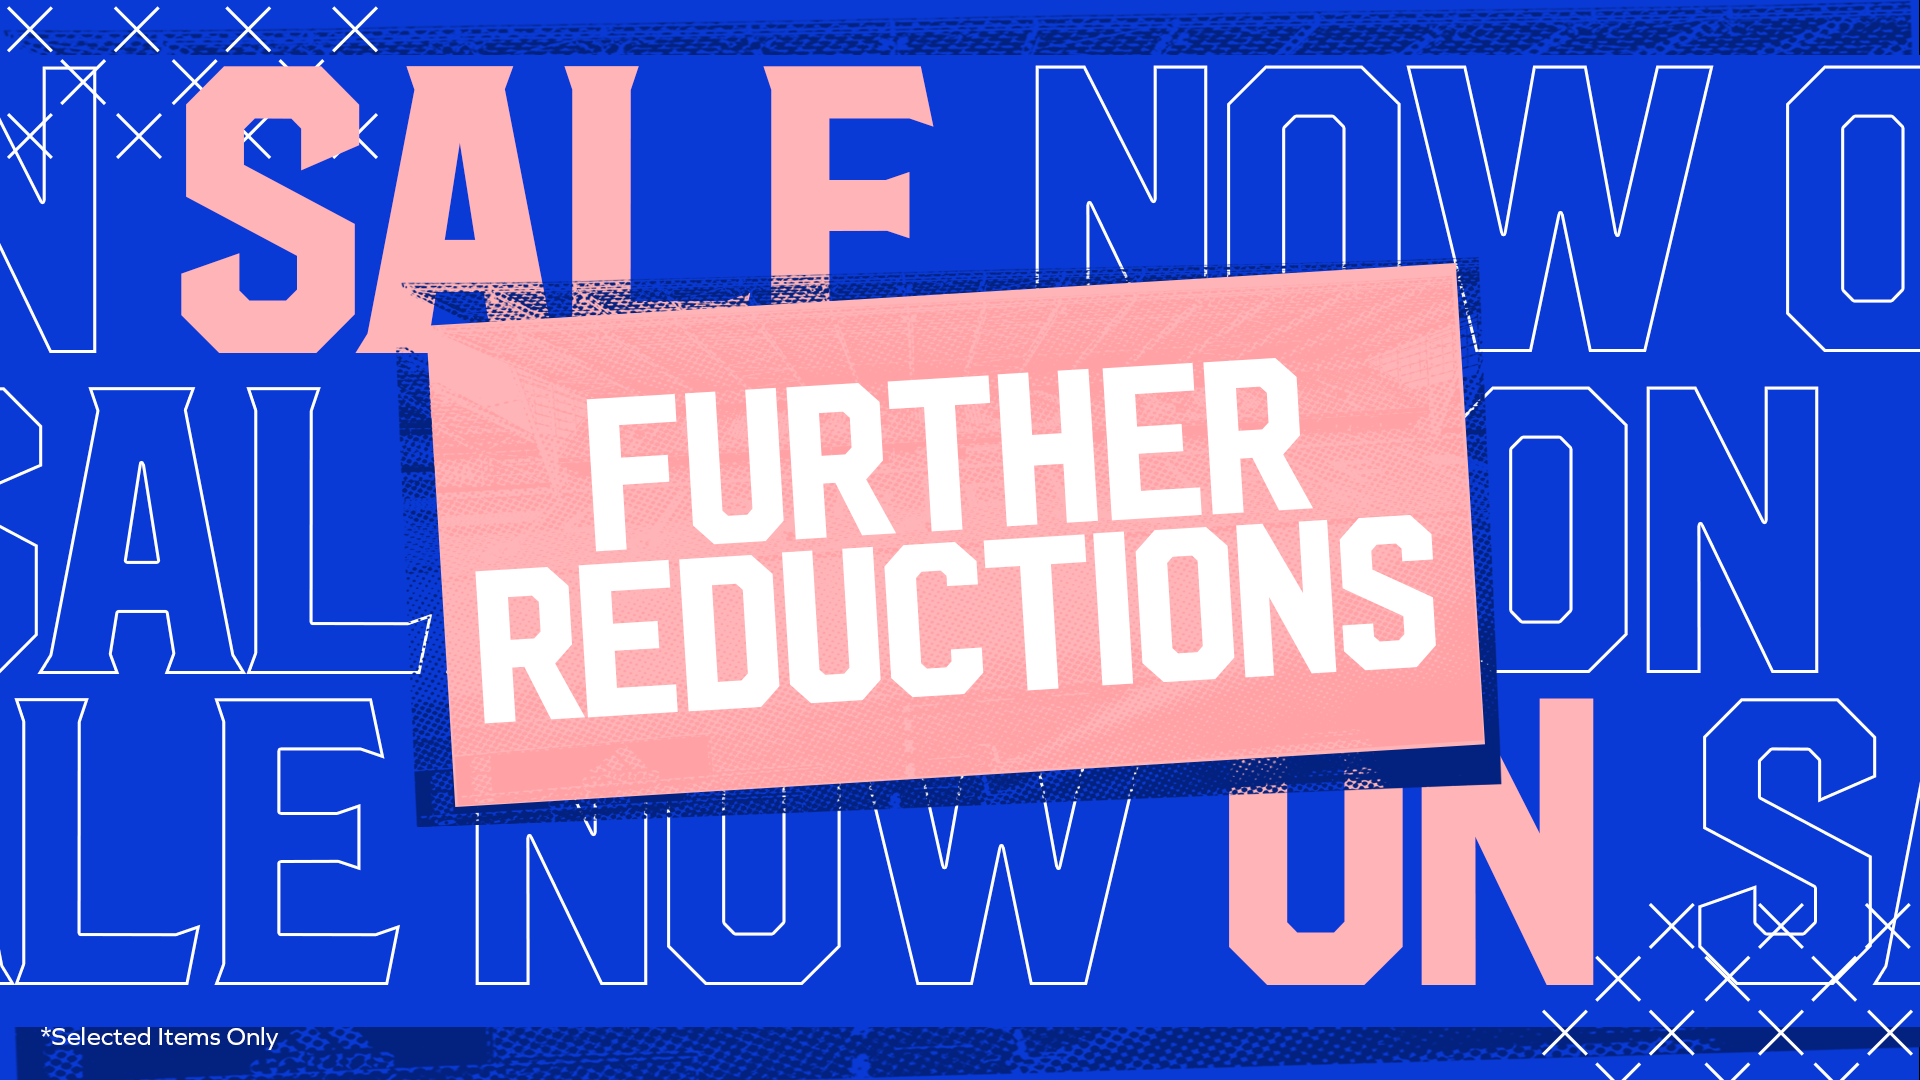 Sale now on - further reductions!